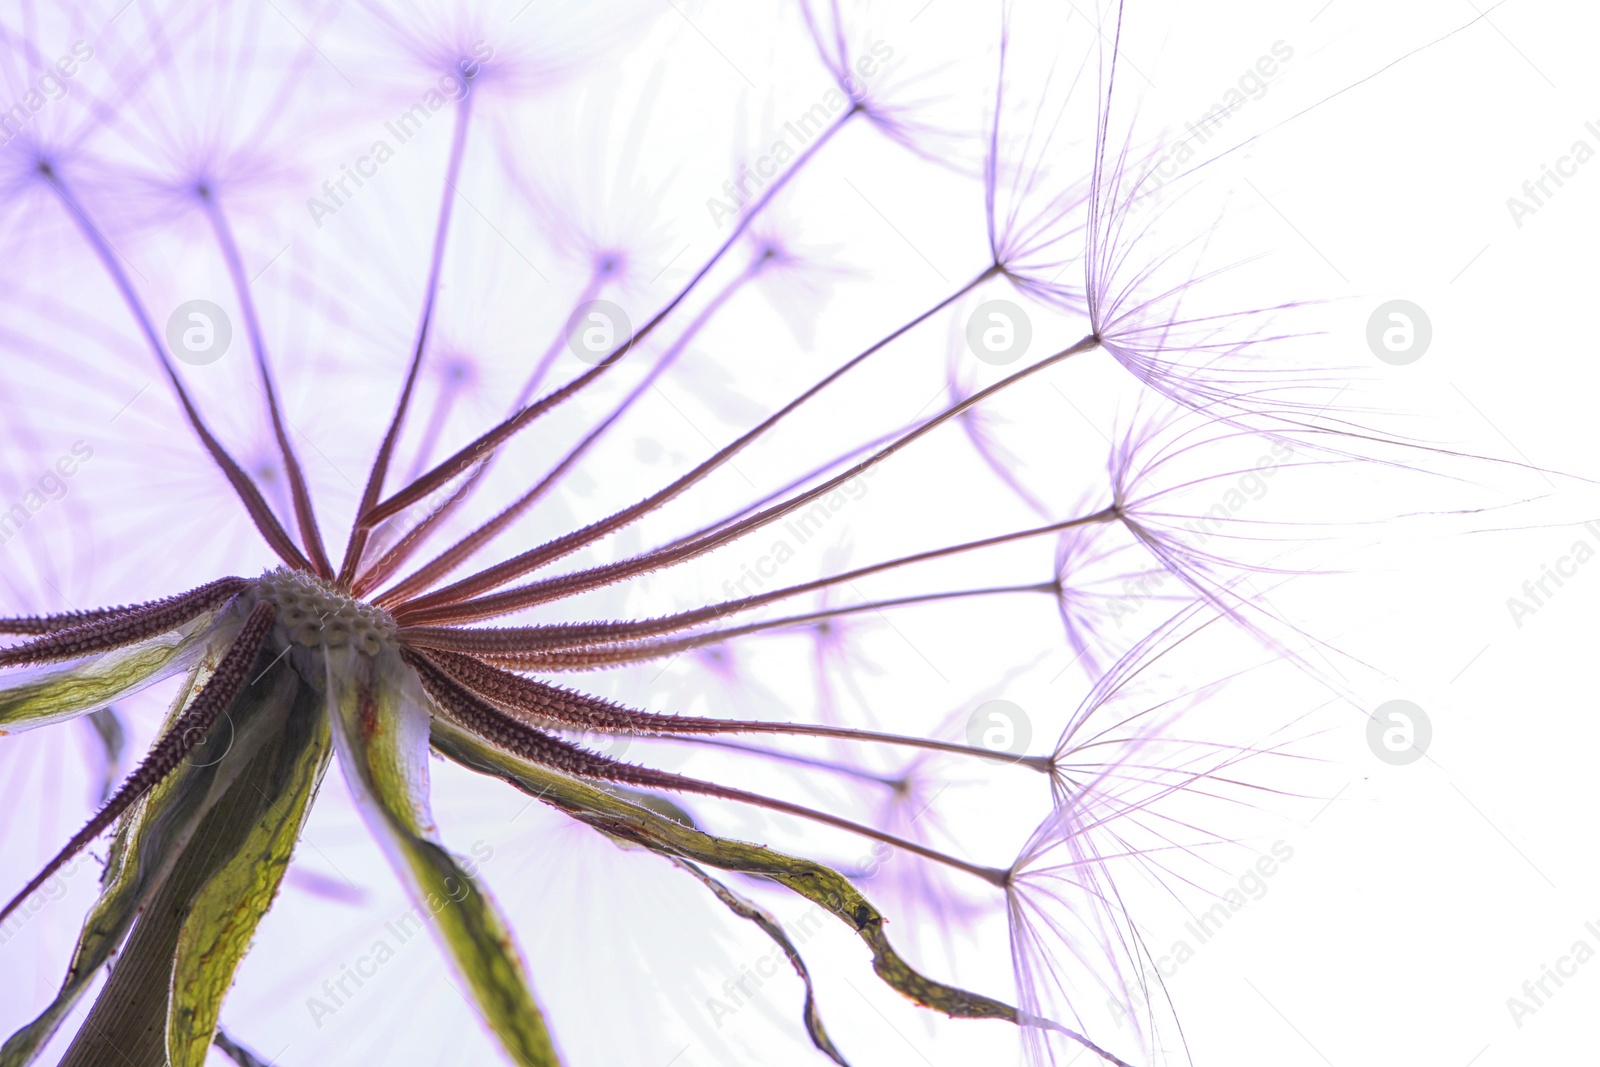 Photo of Dandelion seed head on light background, close up